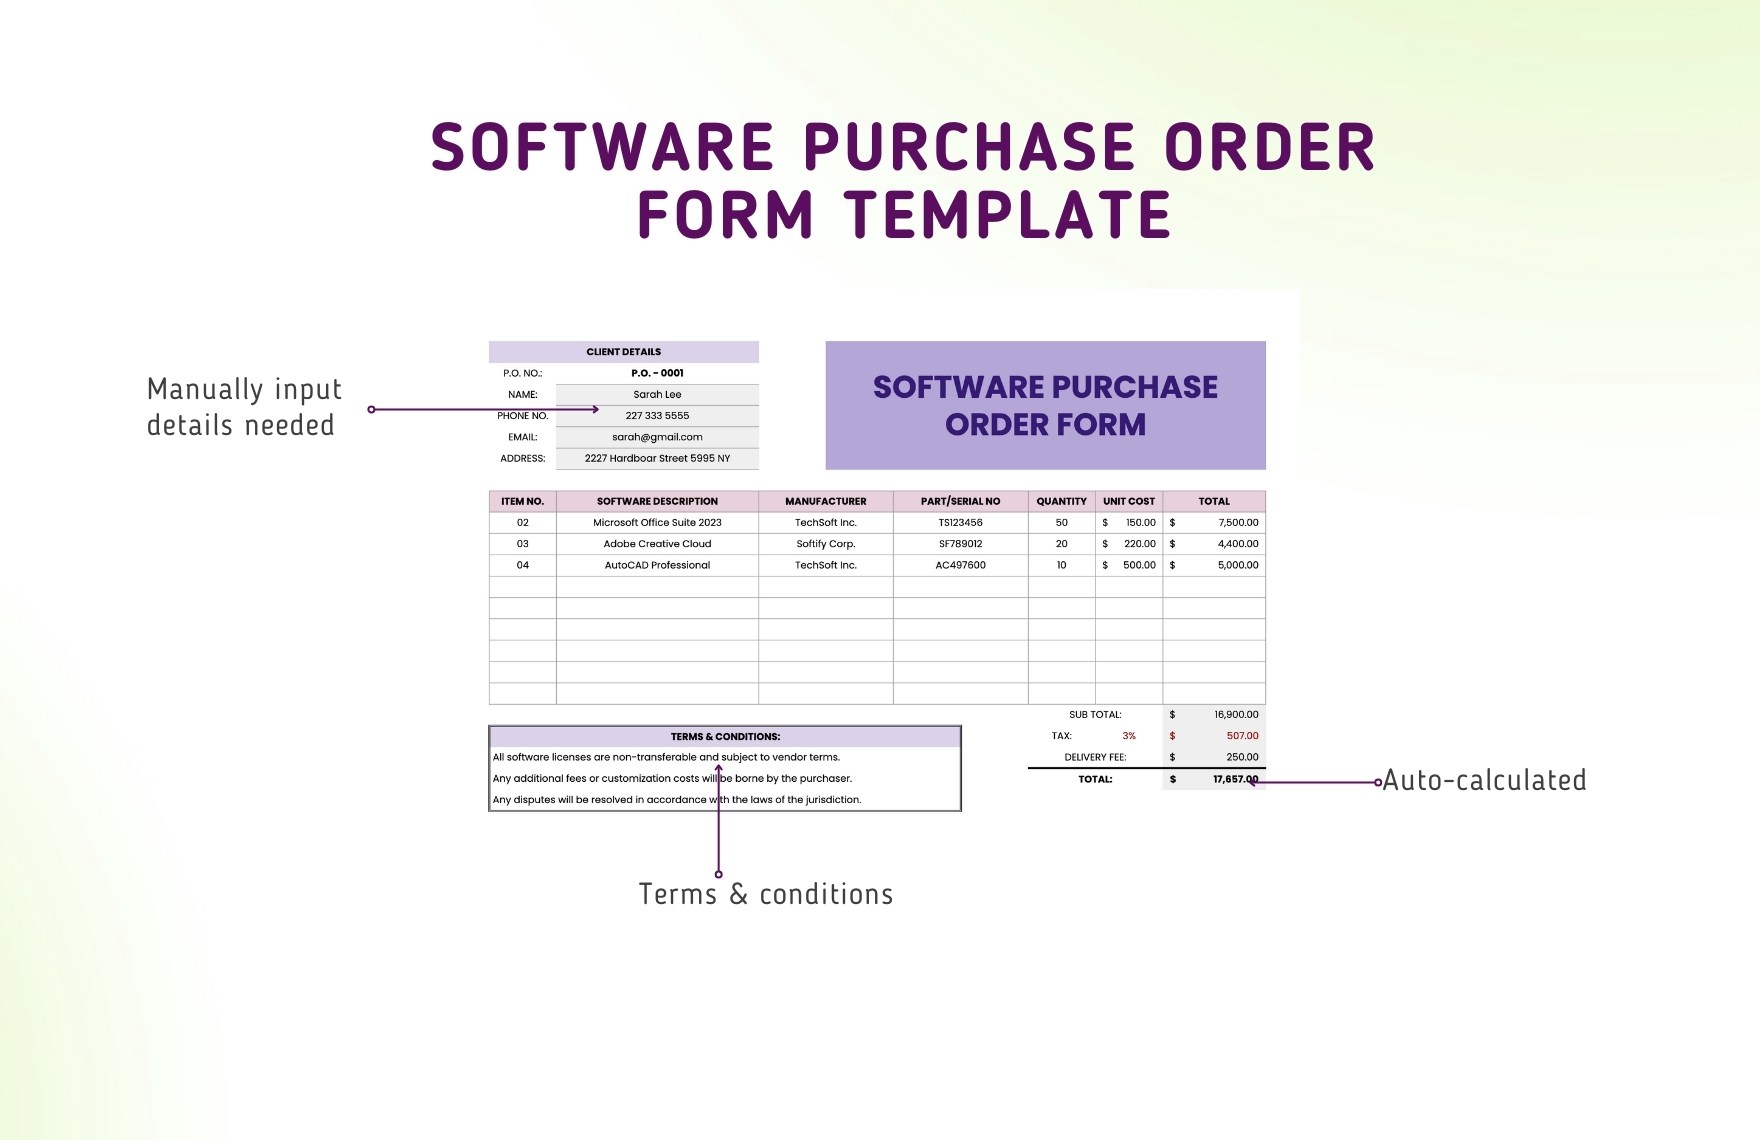 Software Purchase Order Form Template